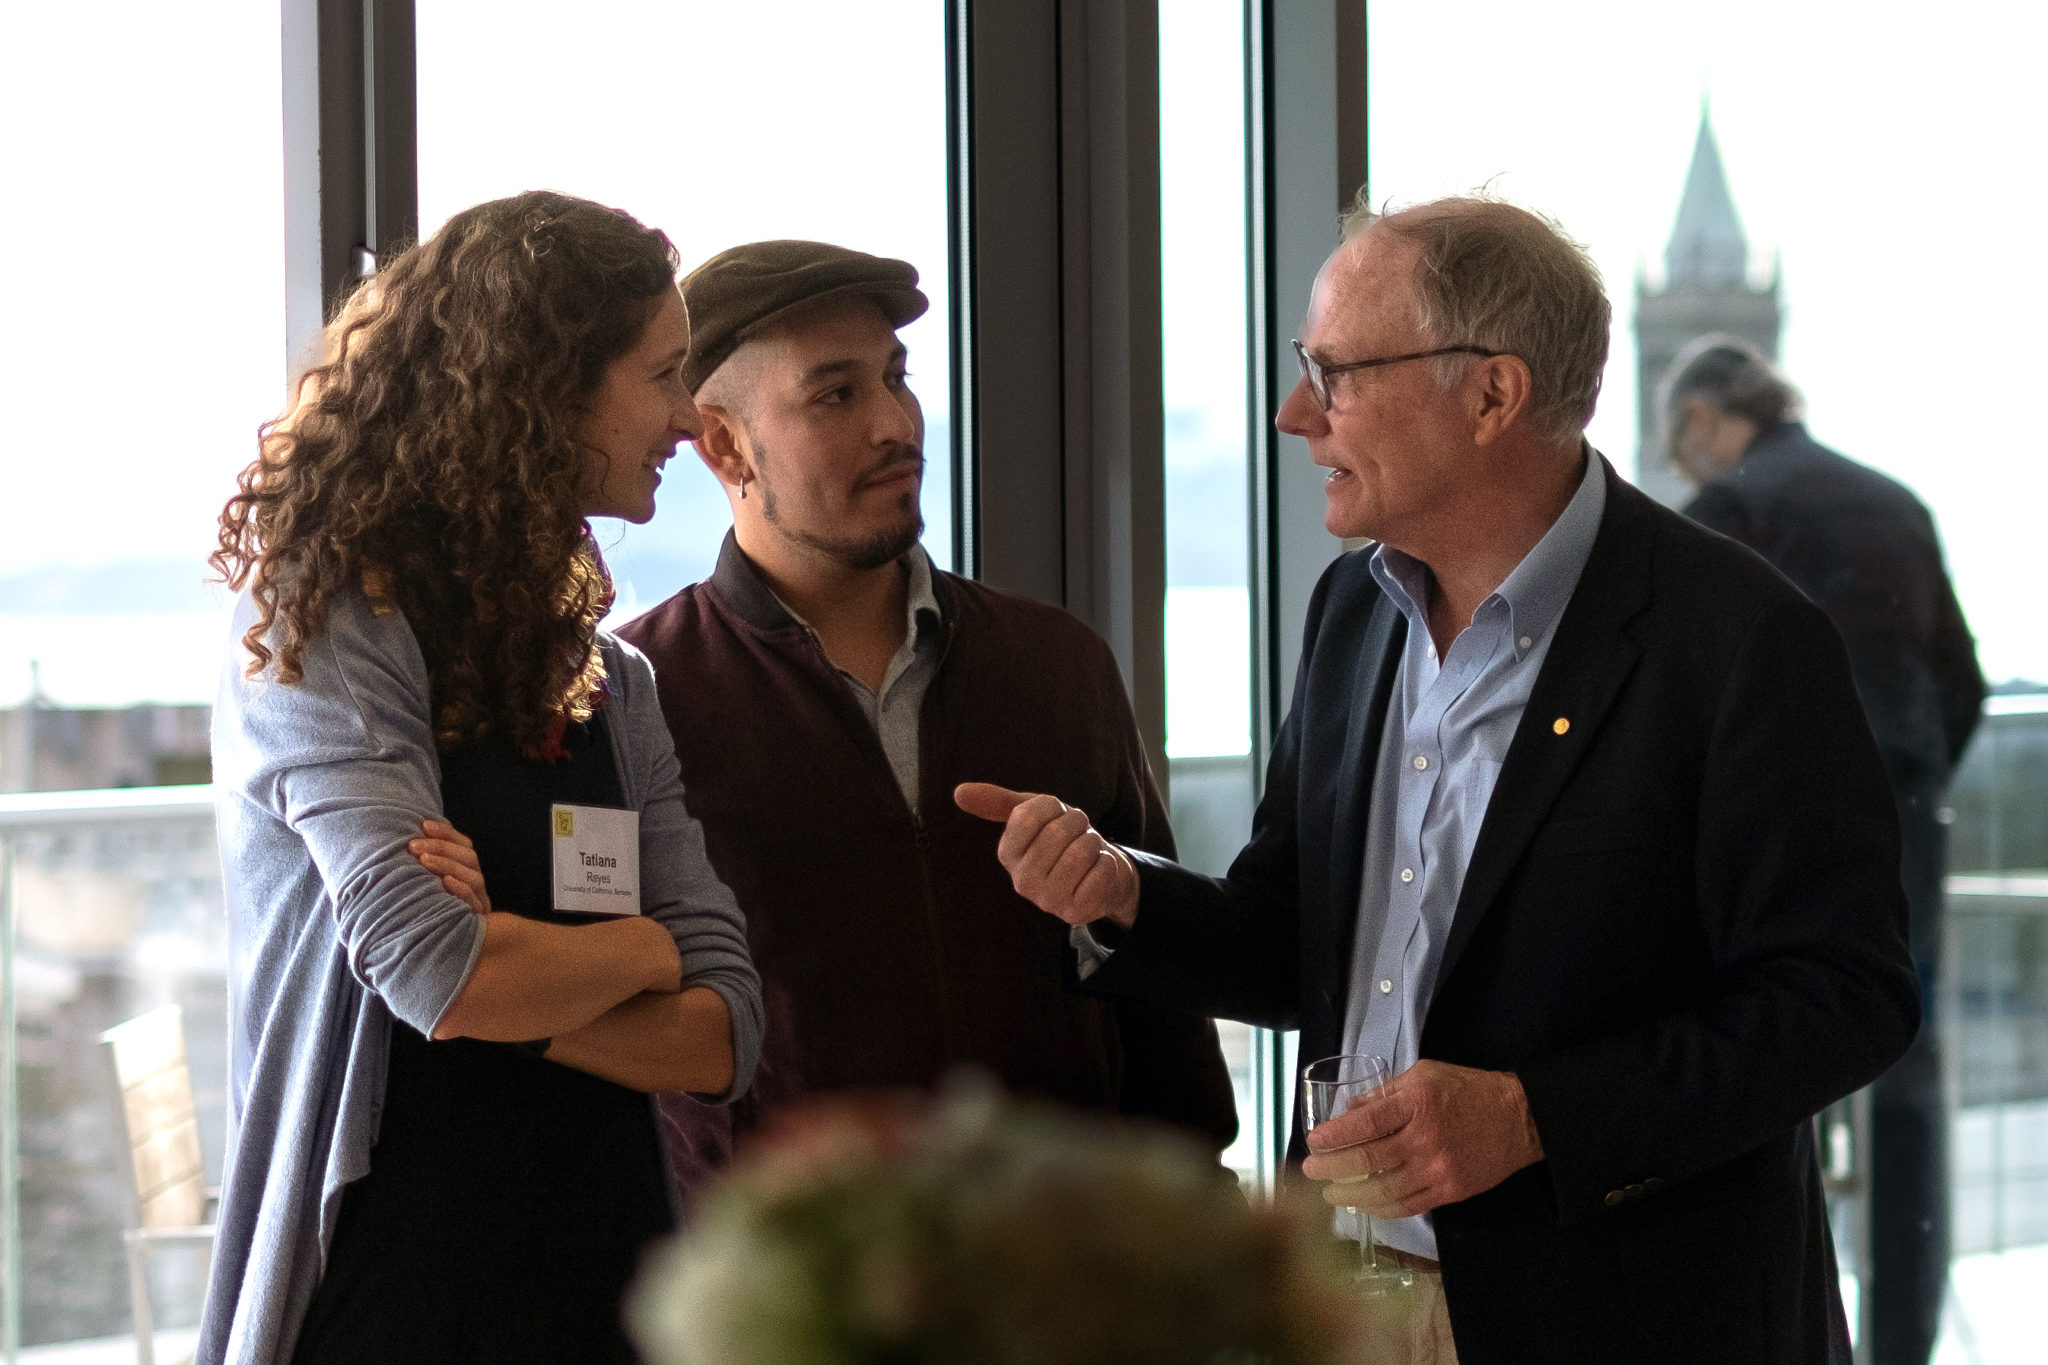 David Card (right), one of the 2021 Nobel laureates in economics, talks with young colleagues during a quieter moment during the two-day event honoring his contributions. While he has made remarkable contributions to the field of labor economics and research methodology, Card is known as well for teaching and mentoring young economists.